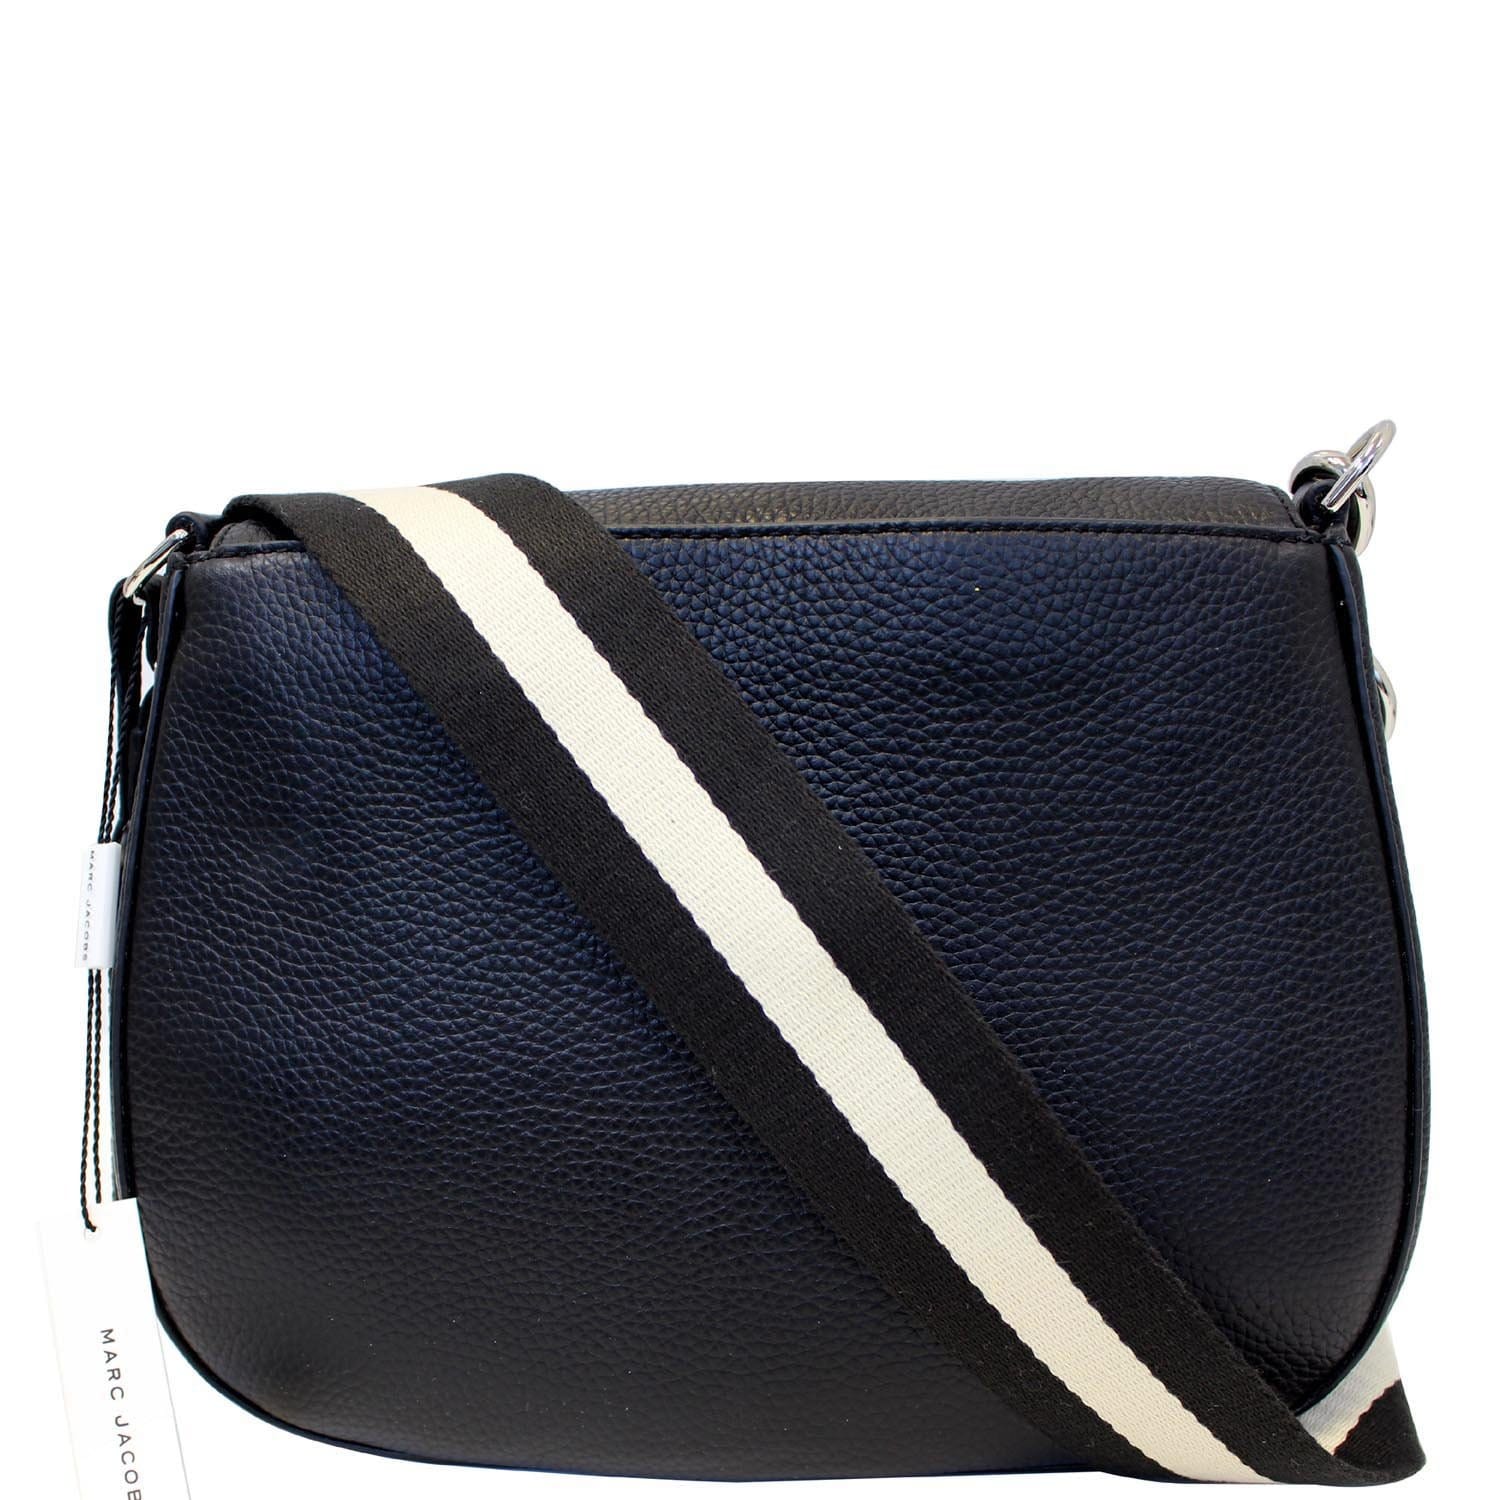 Bags CLUTCH BAGS - Cross body bag MARC BY MARC JACOBS